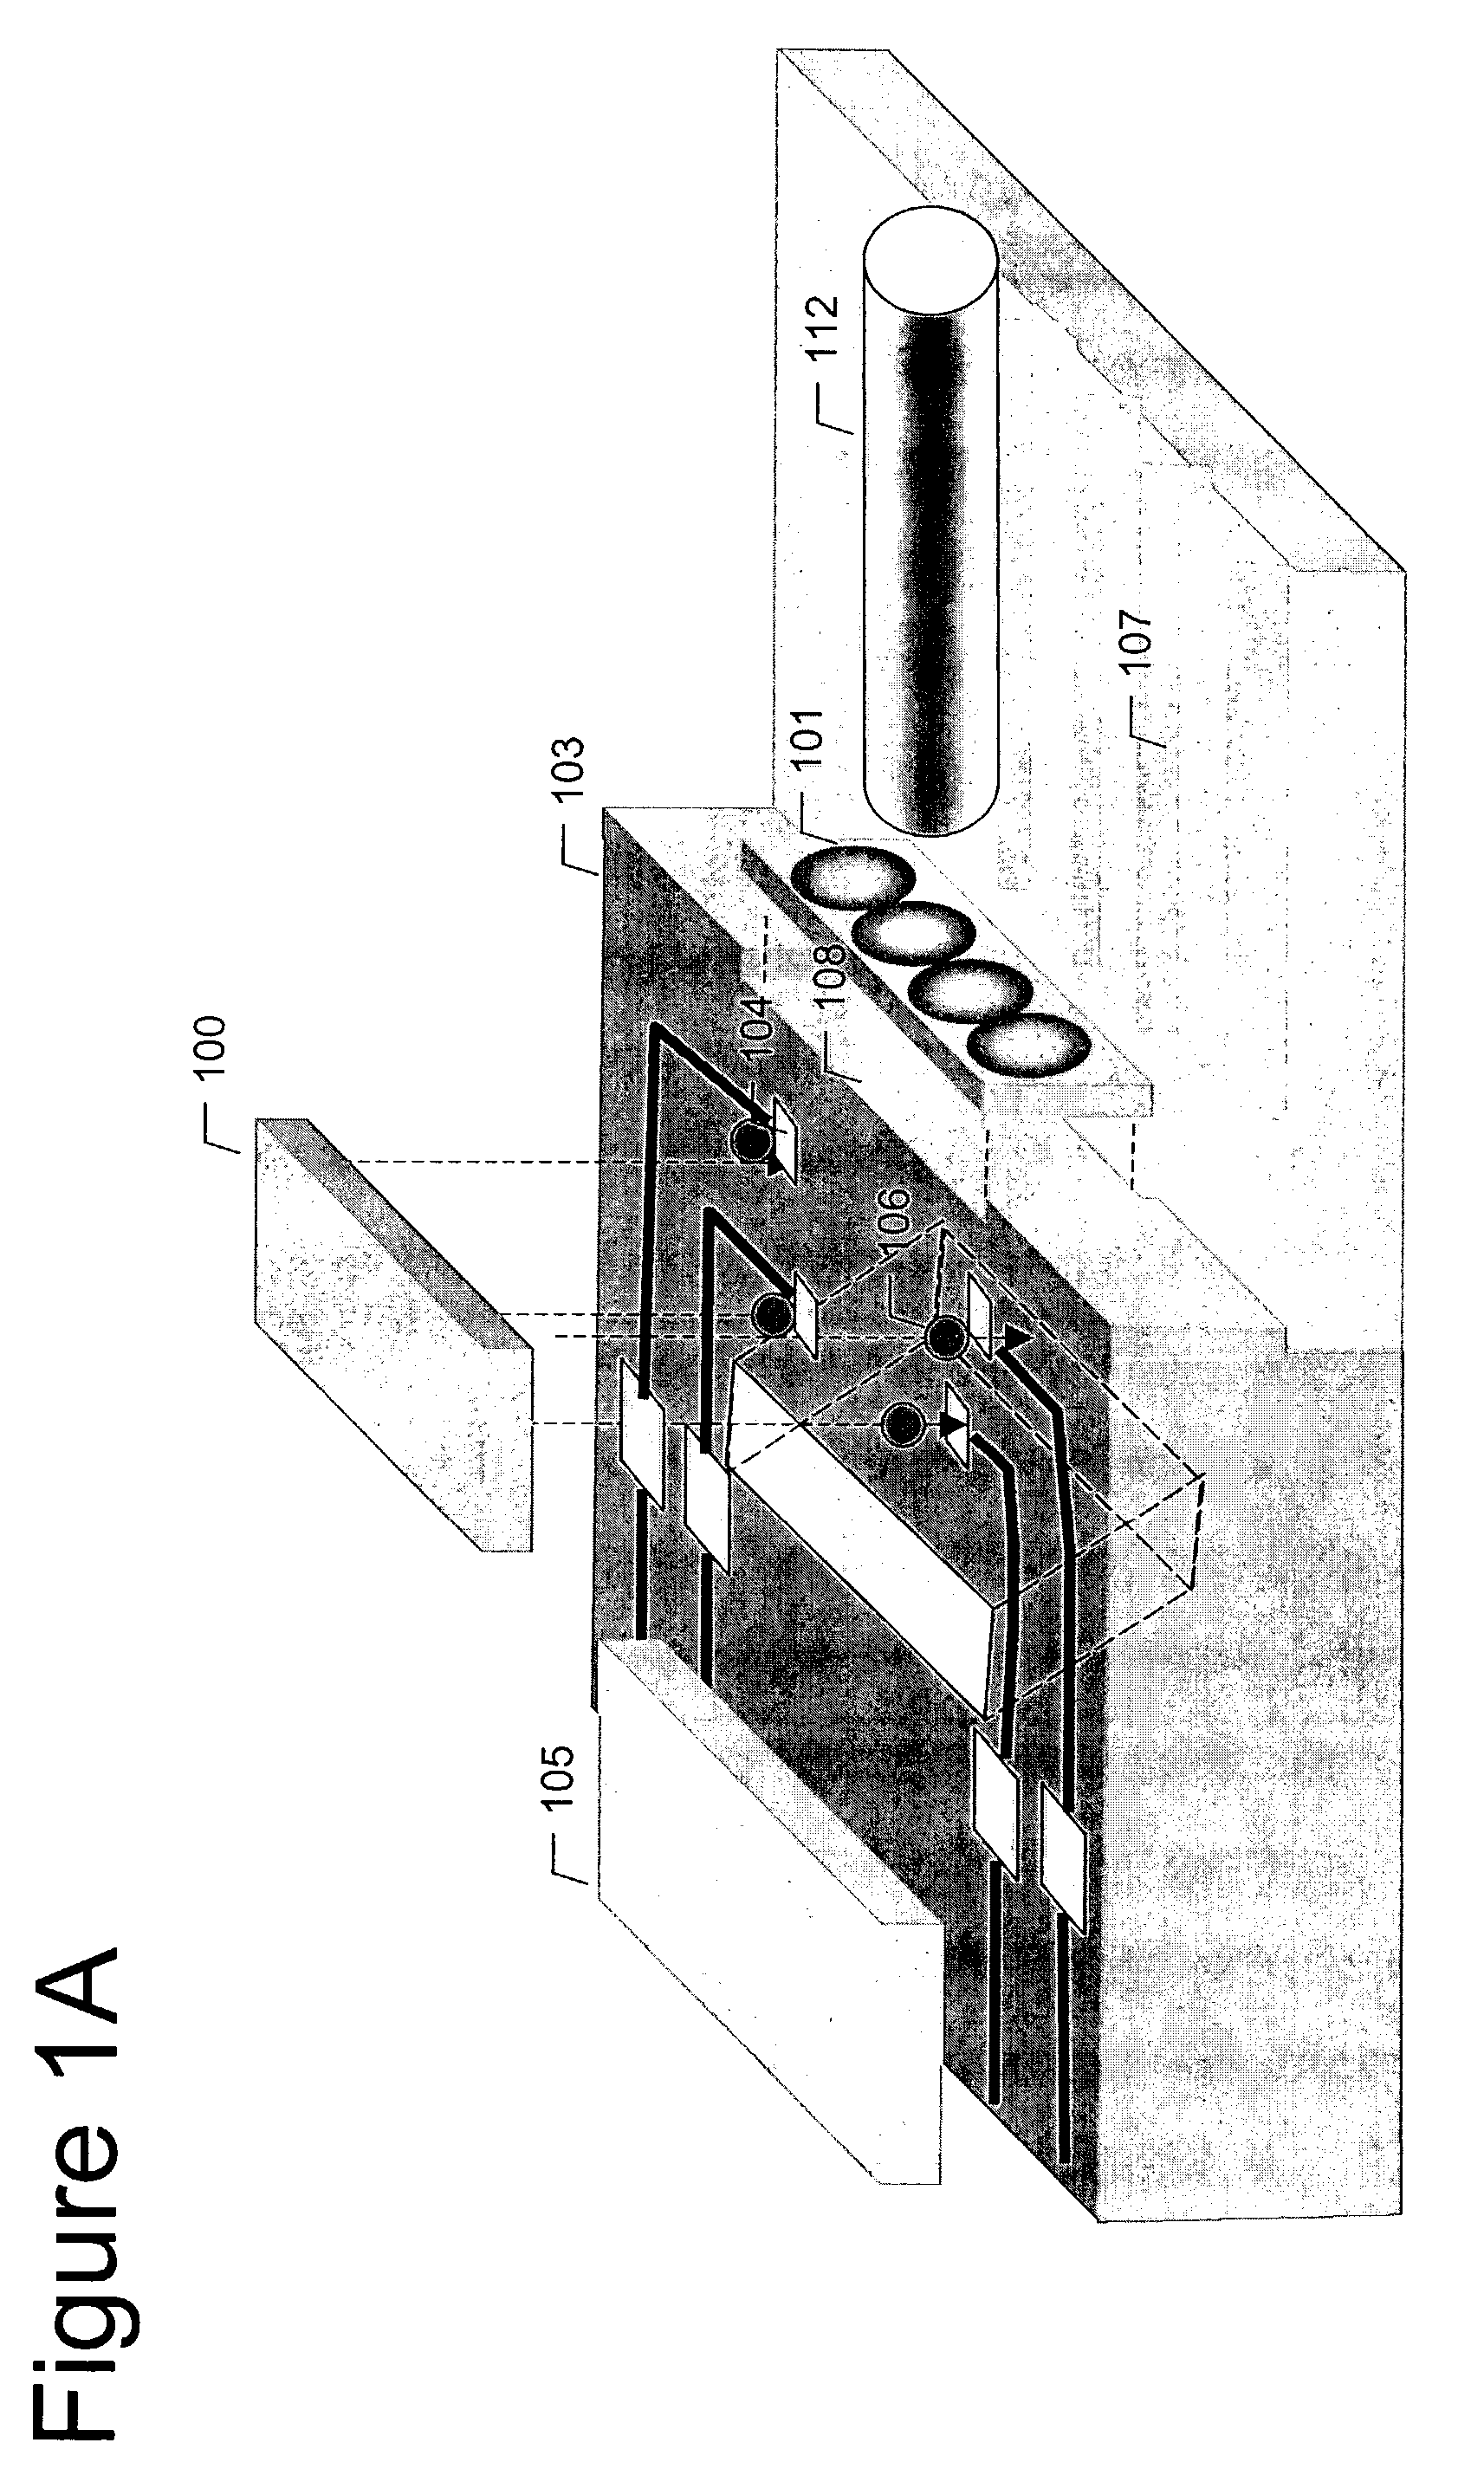 Integrated platform for passive optical alignment of semiconductor device with optical fiber